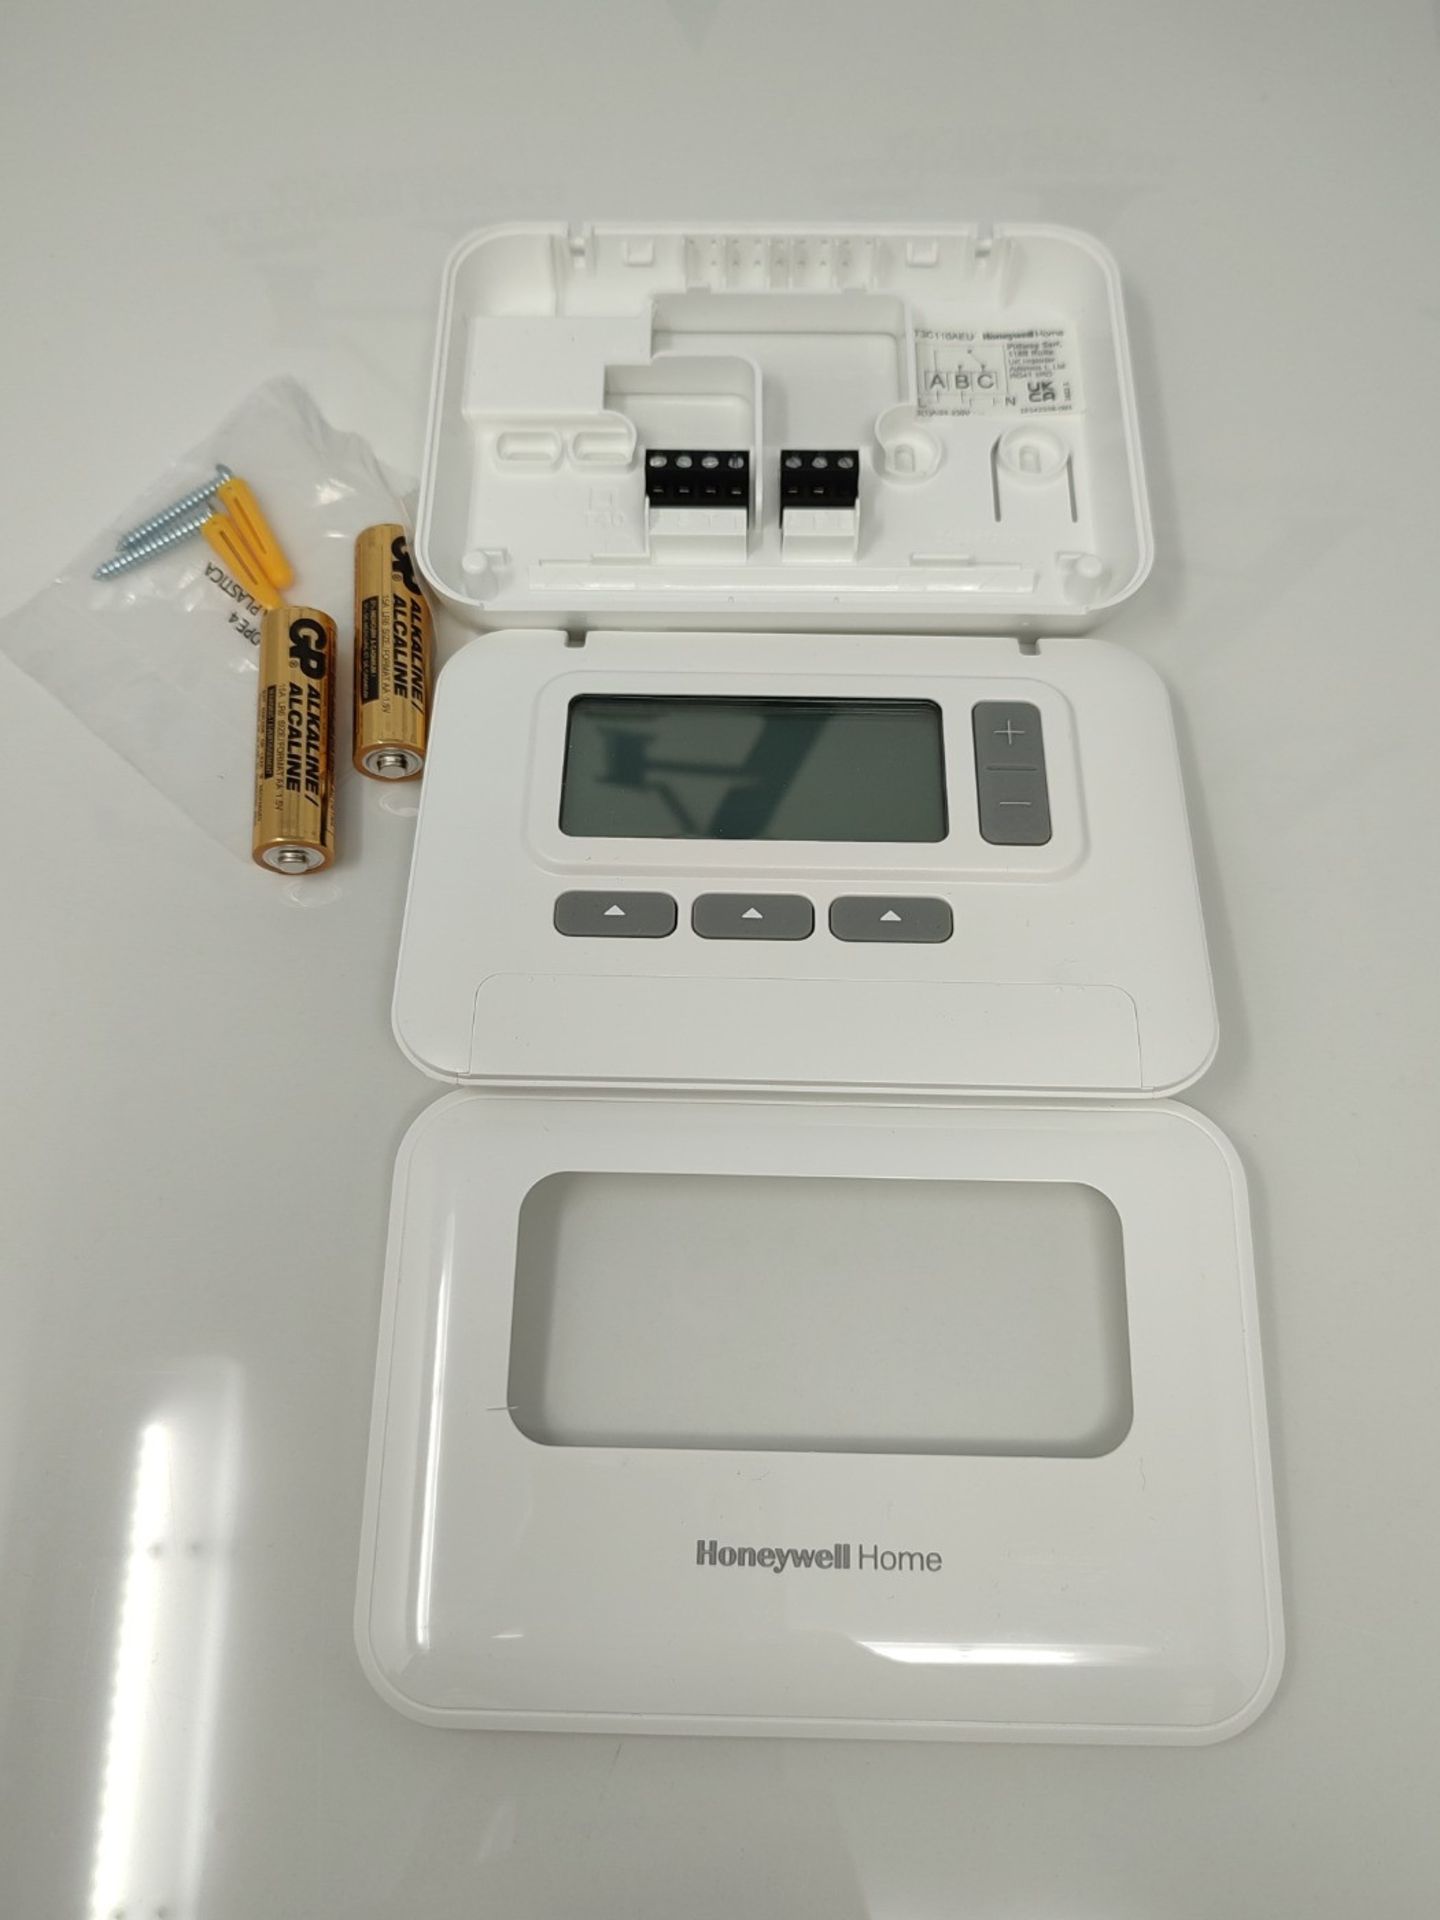 RRP £83.00 Honeywell Home T3 Wired 7-Day Programmable Thermostat, White, 136 x 97 x 26 mm - Image 3 of 3